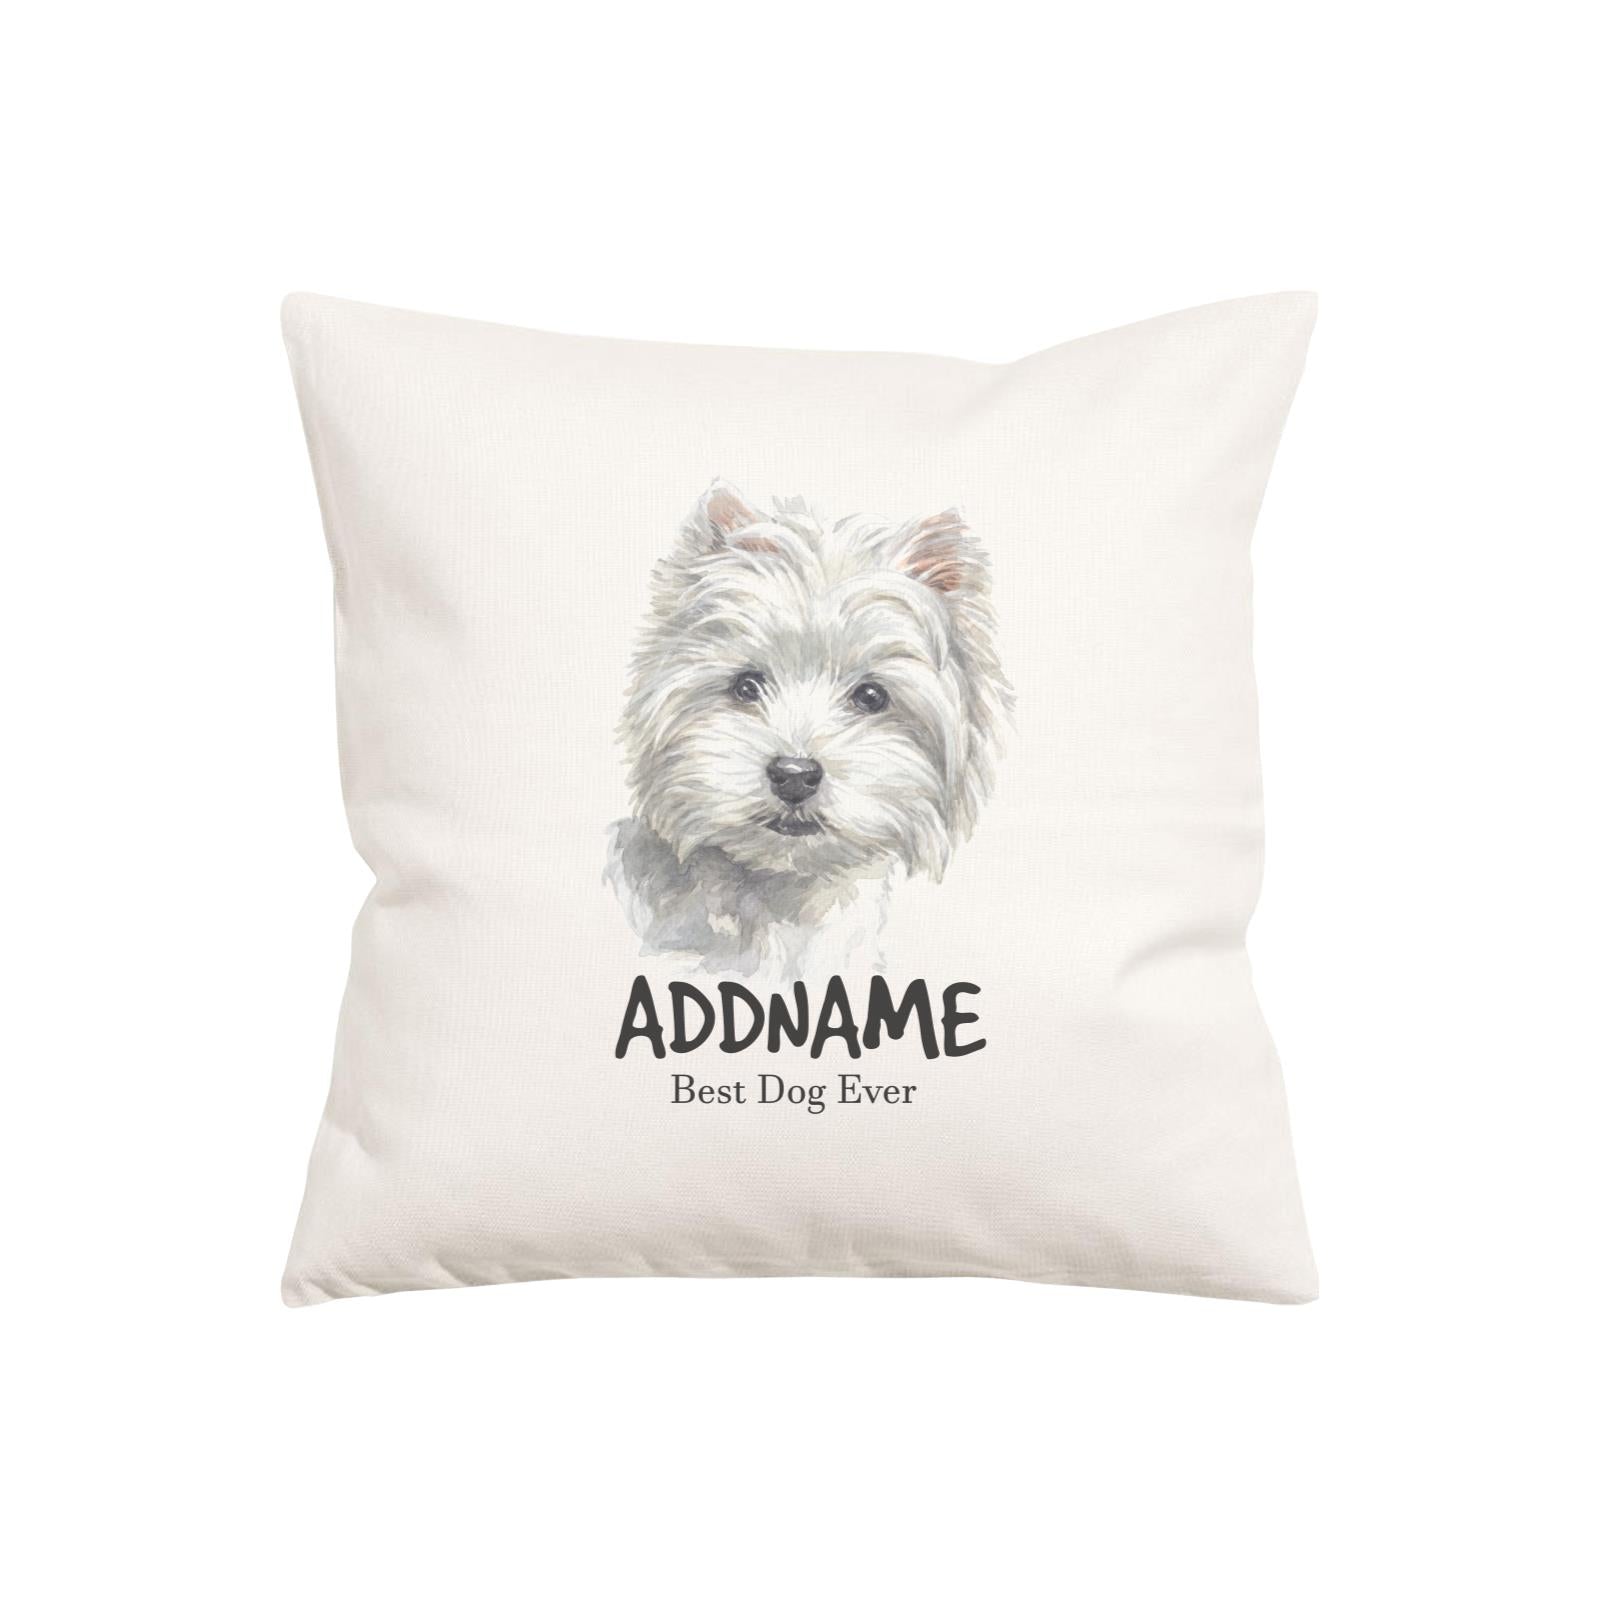 Watercolor Dog Series West Highland White Terrier Best Dog Ever Addname Pillow Cushion